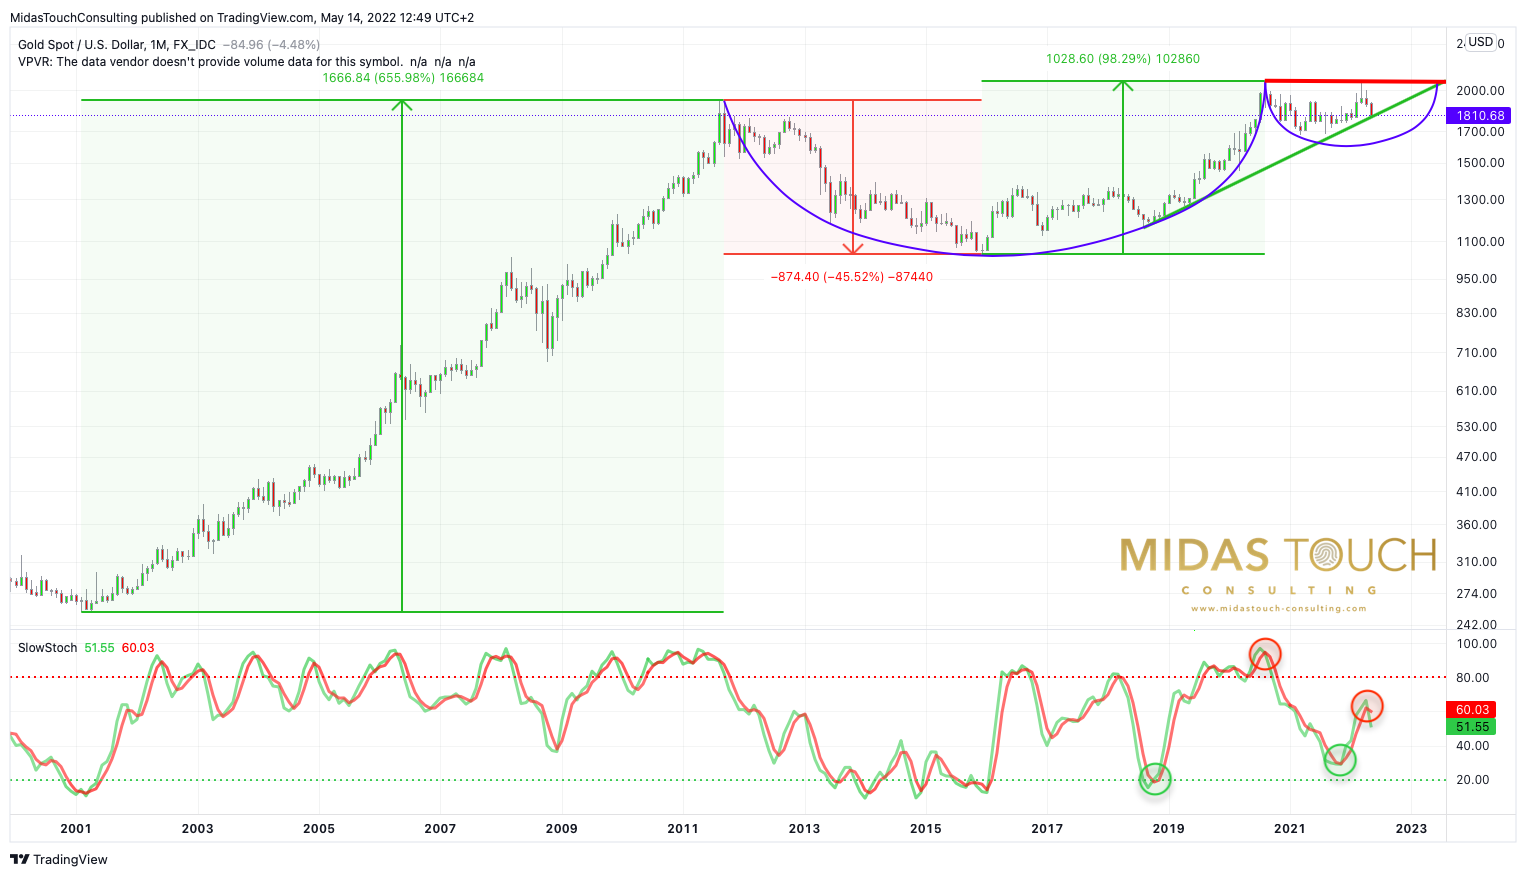 Gold in US-Dollars, monthly chart as of May 14th, 2022. Source: Tradingview